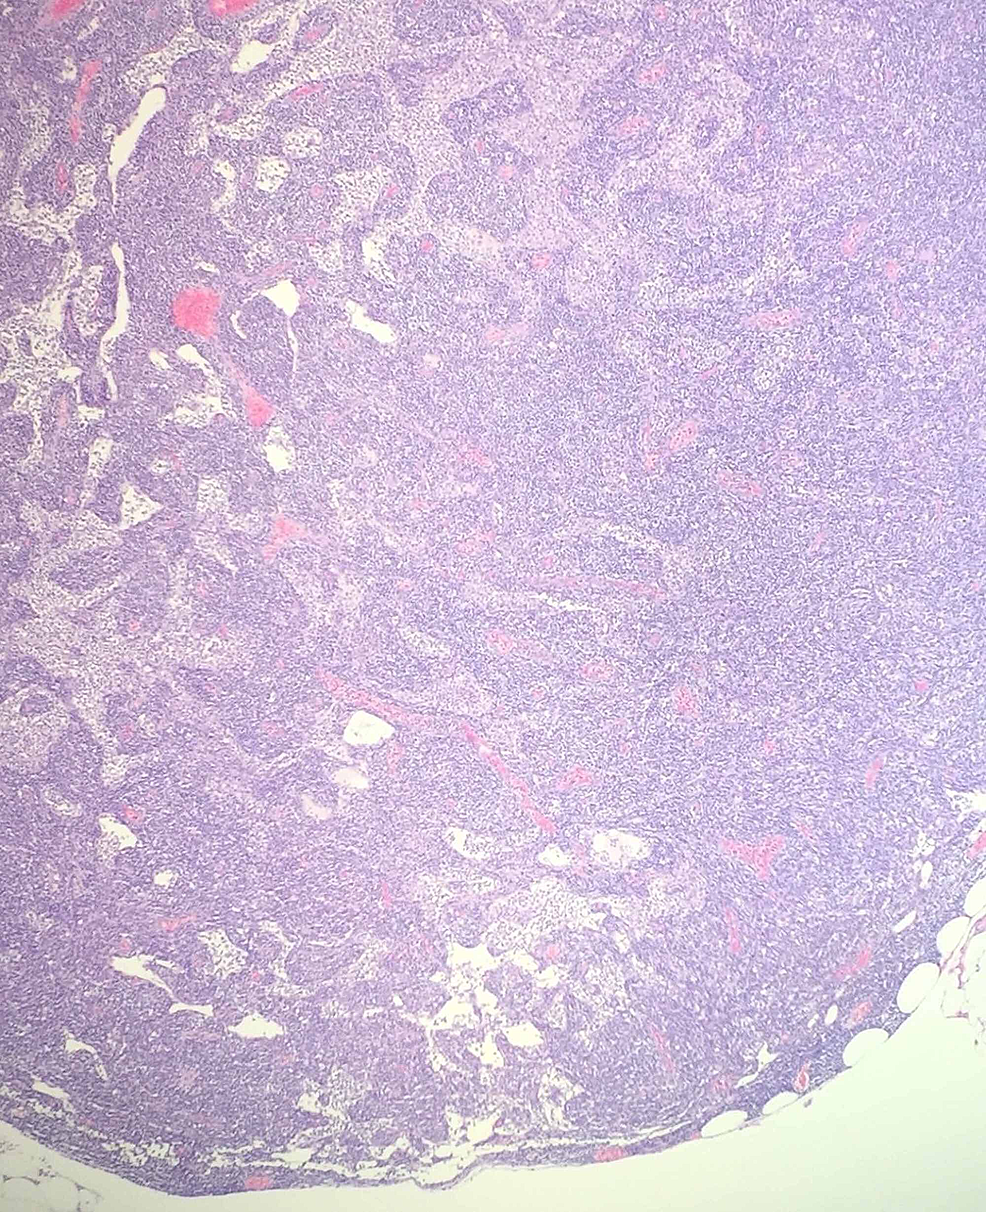 Pericolic-lymph-node-with-effaced-architecture-(no-follicles-with-germinal-centers-are-present),-hematoxylin-and-eosin-stain.-Magnification-of-×100.-